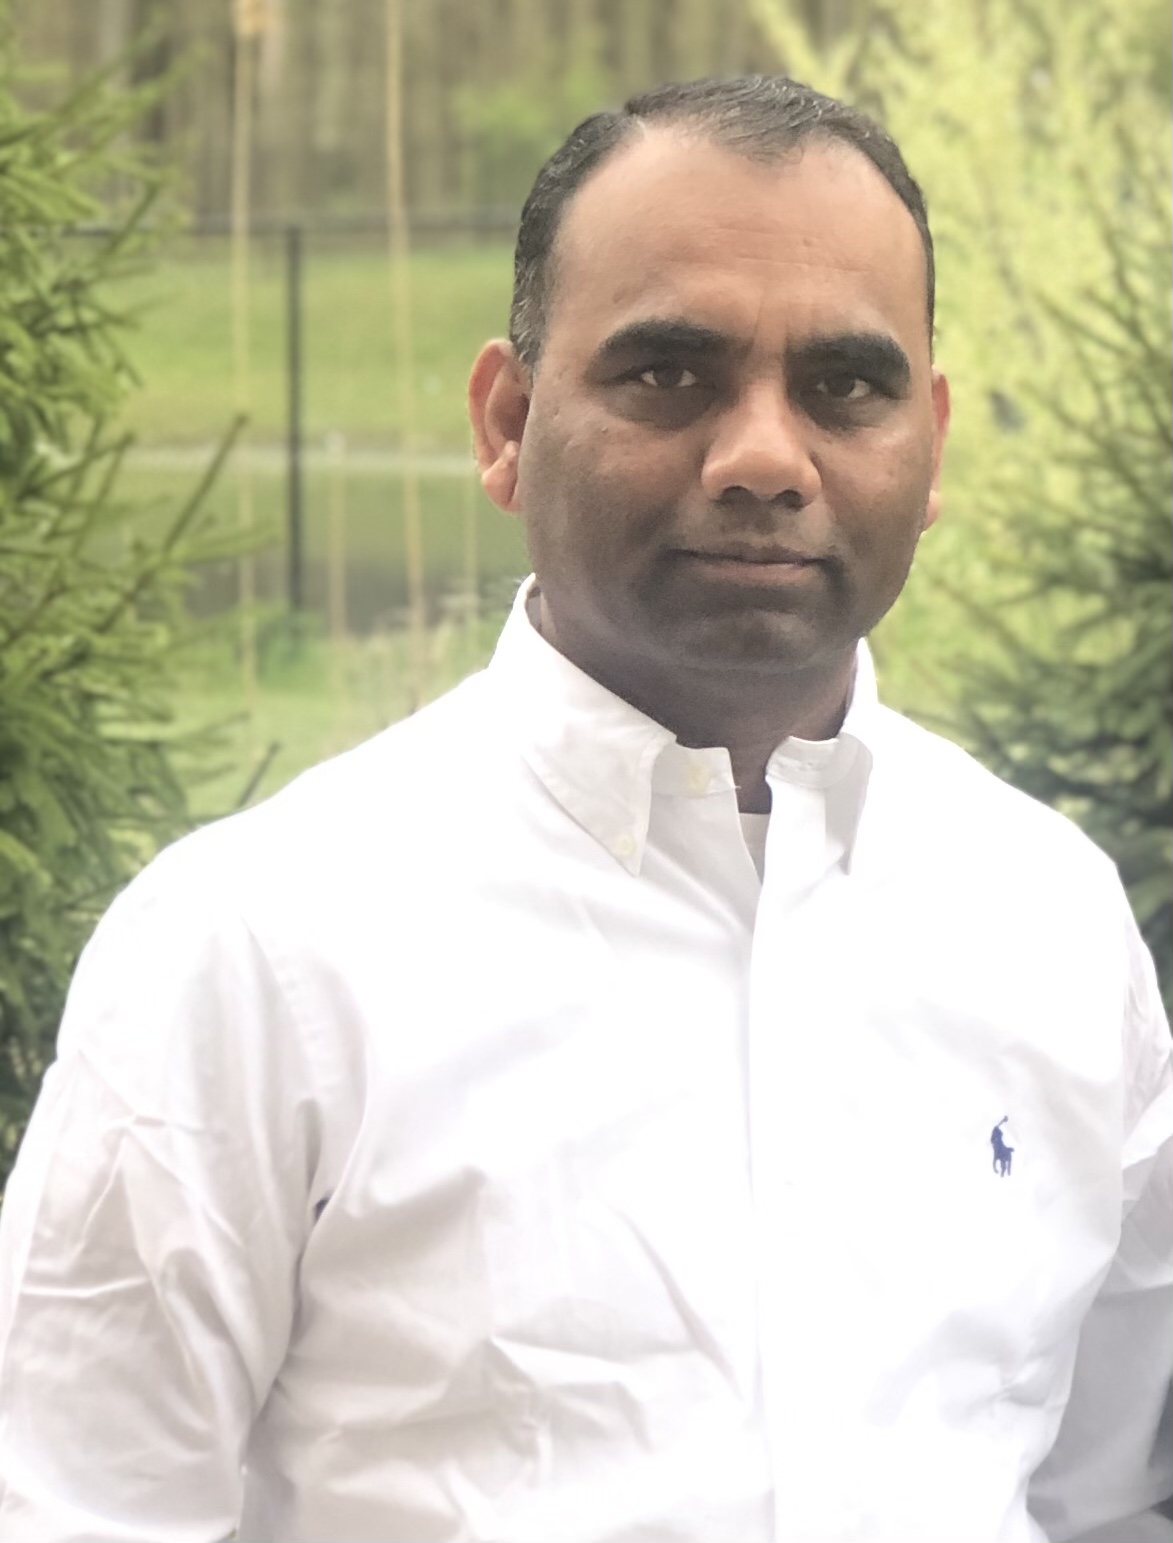 Gopi Vutkuri is a Cochair for the Hospitality committees of Mata 2020 Atlantic City